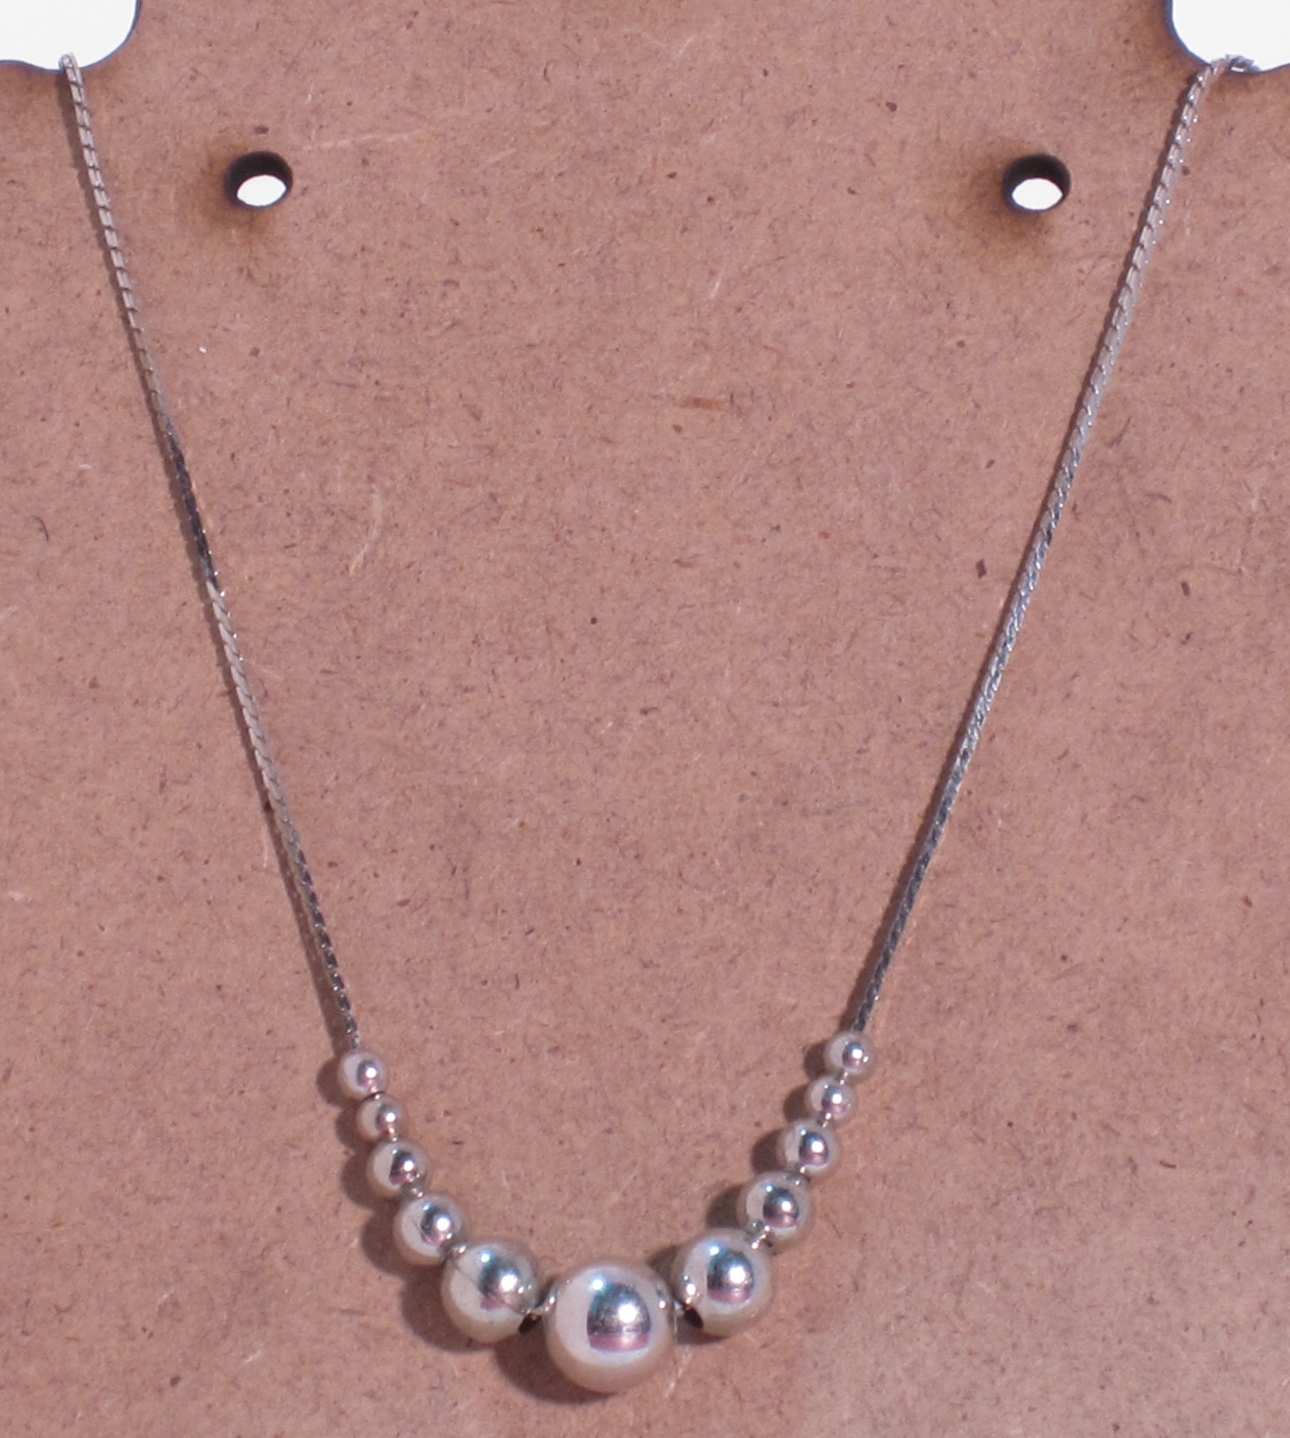 Primary image for Napier 11 bead silver tone necklace